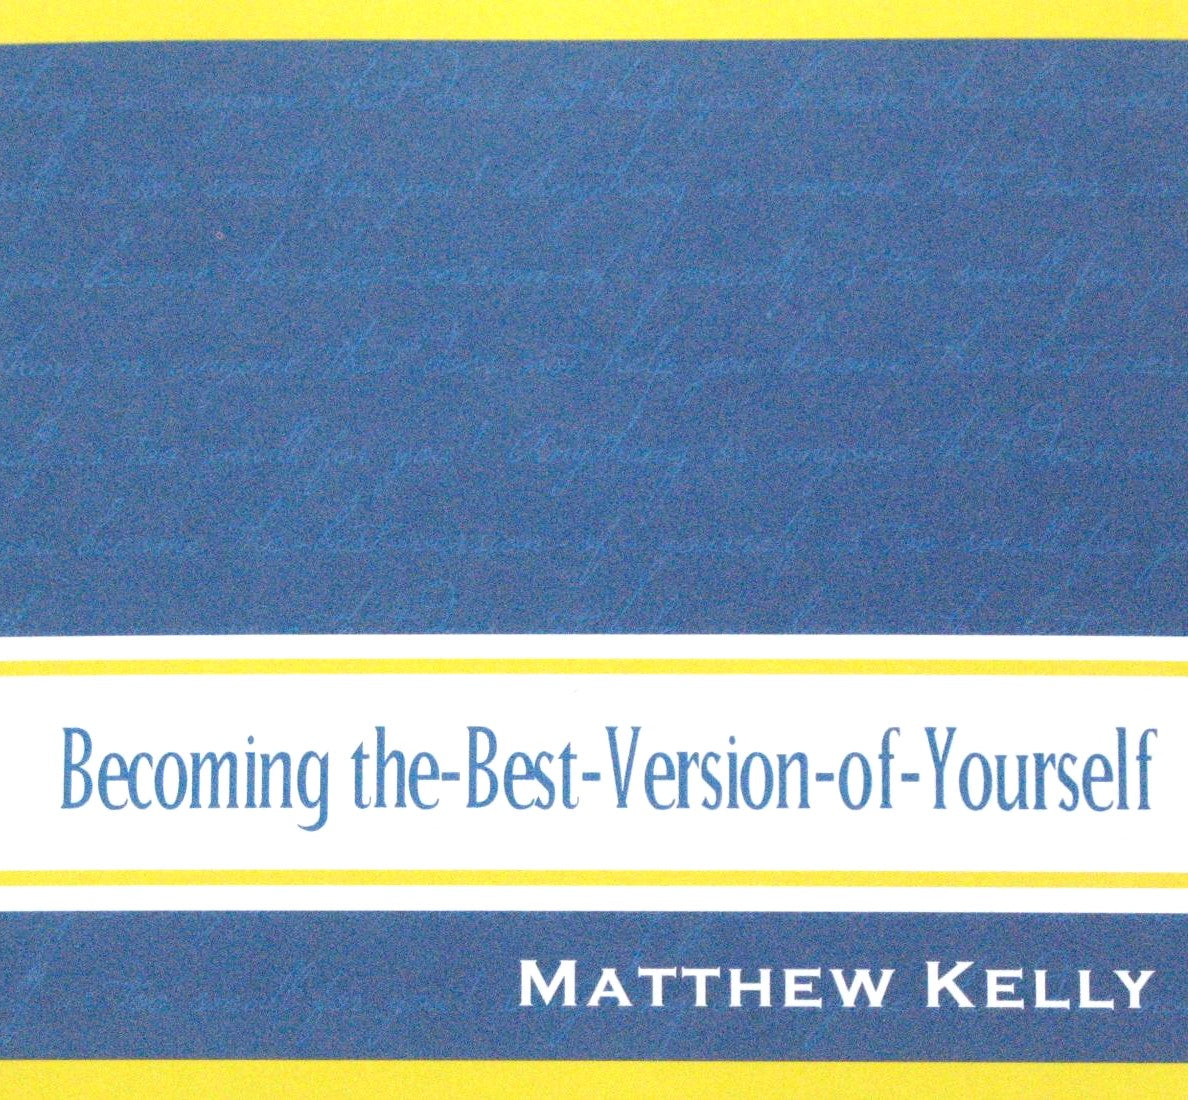 Becoming the-Best-Version-of-Yourself - CD Talk by Matthew Kelly